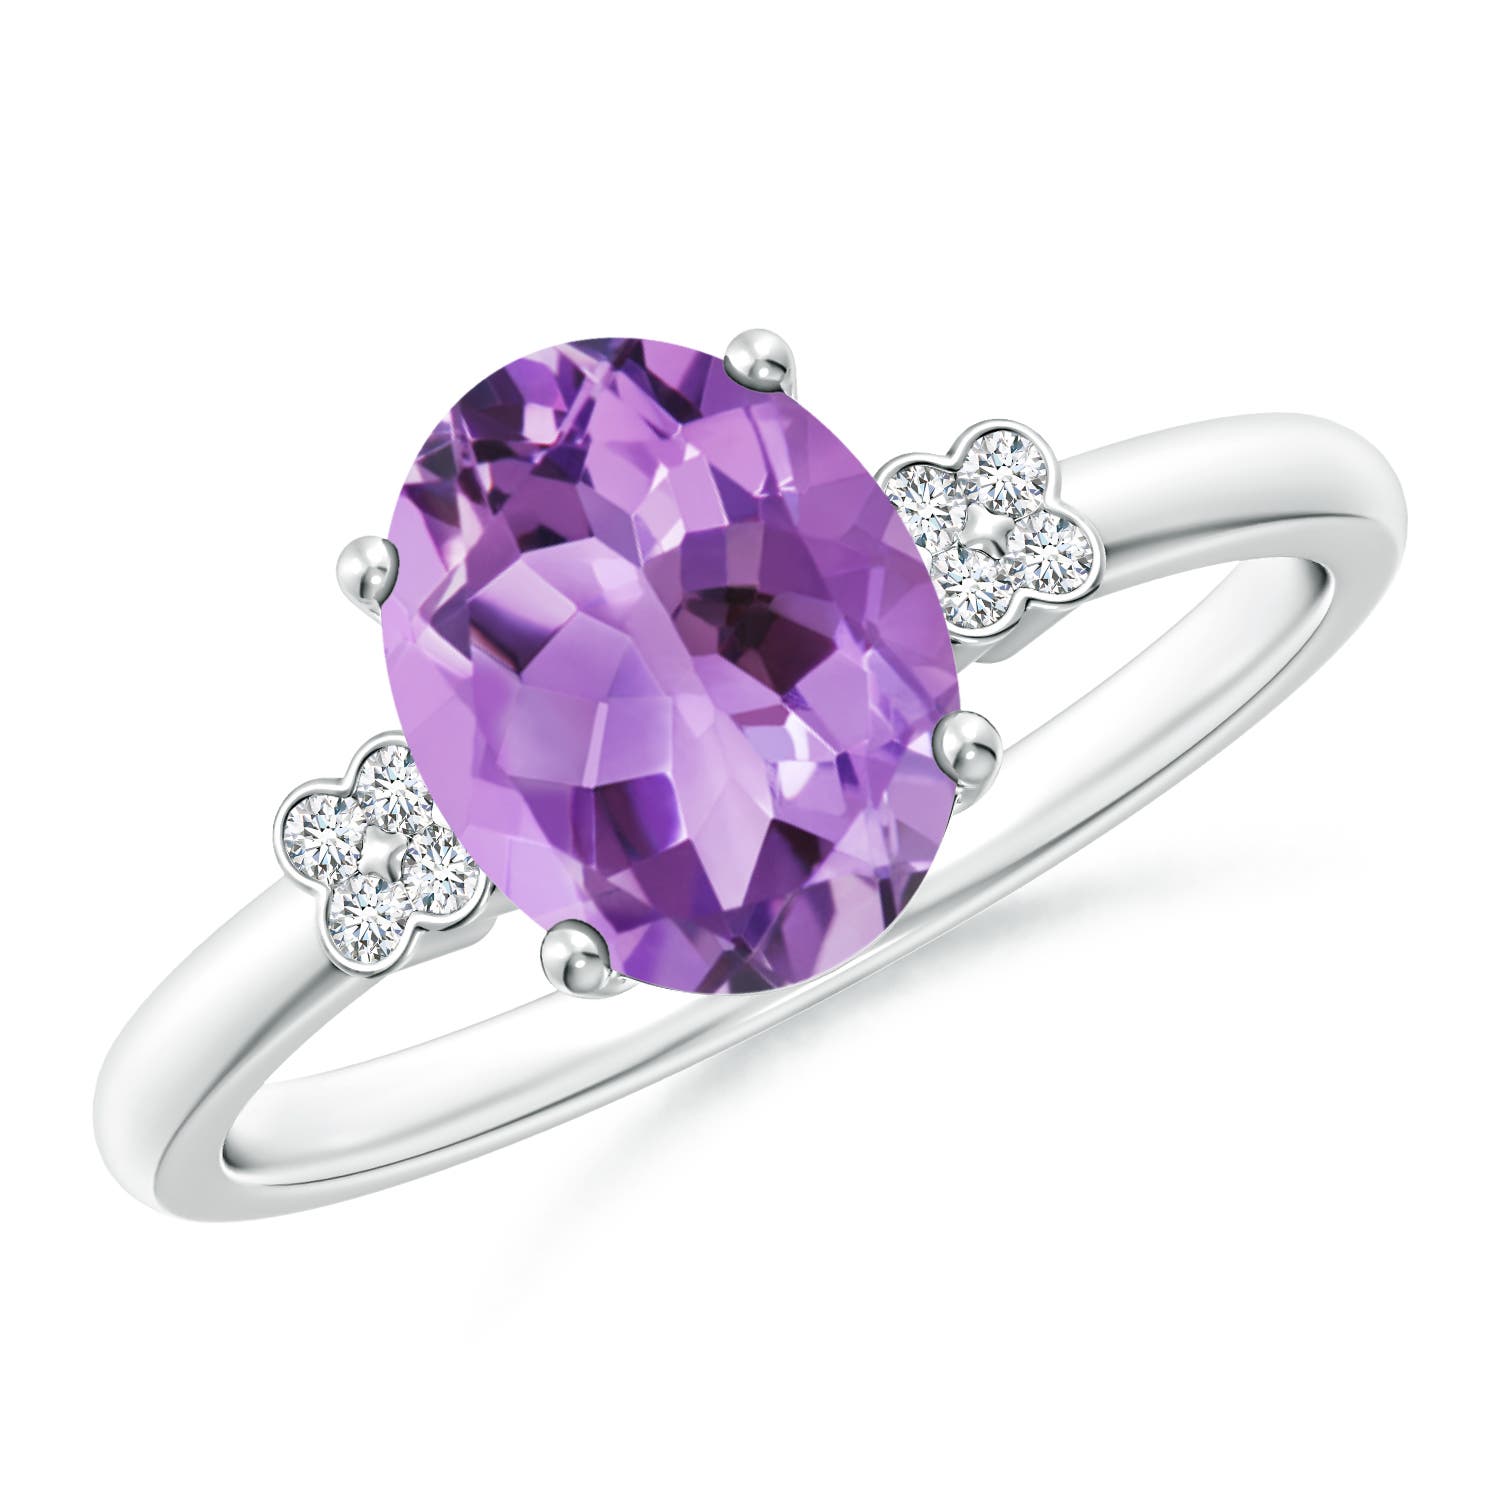 A - Amethyst / 1.66 CT / 14 KT White Gold